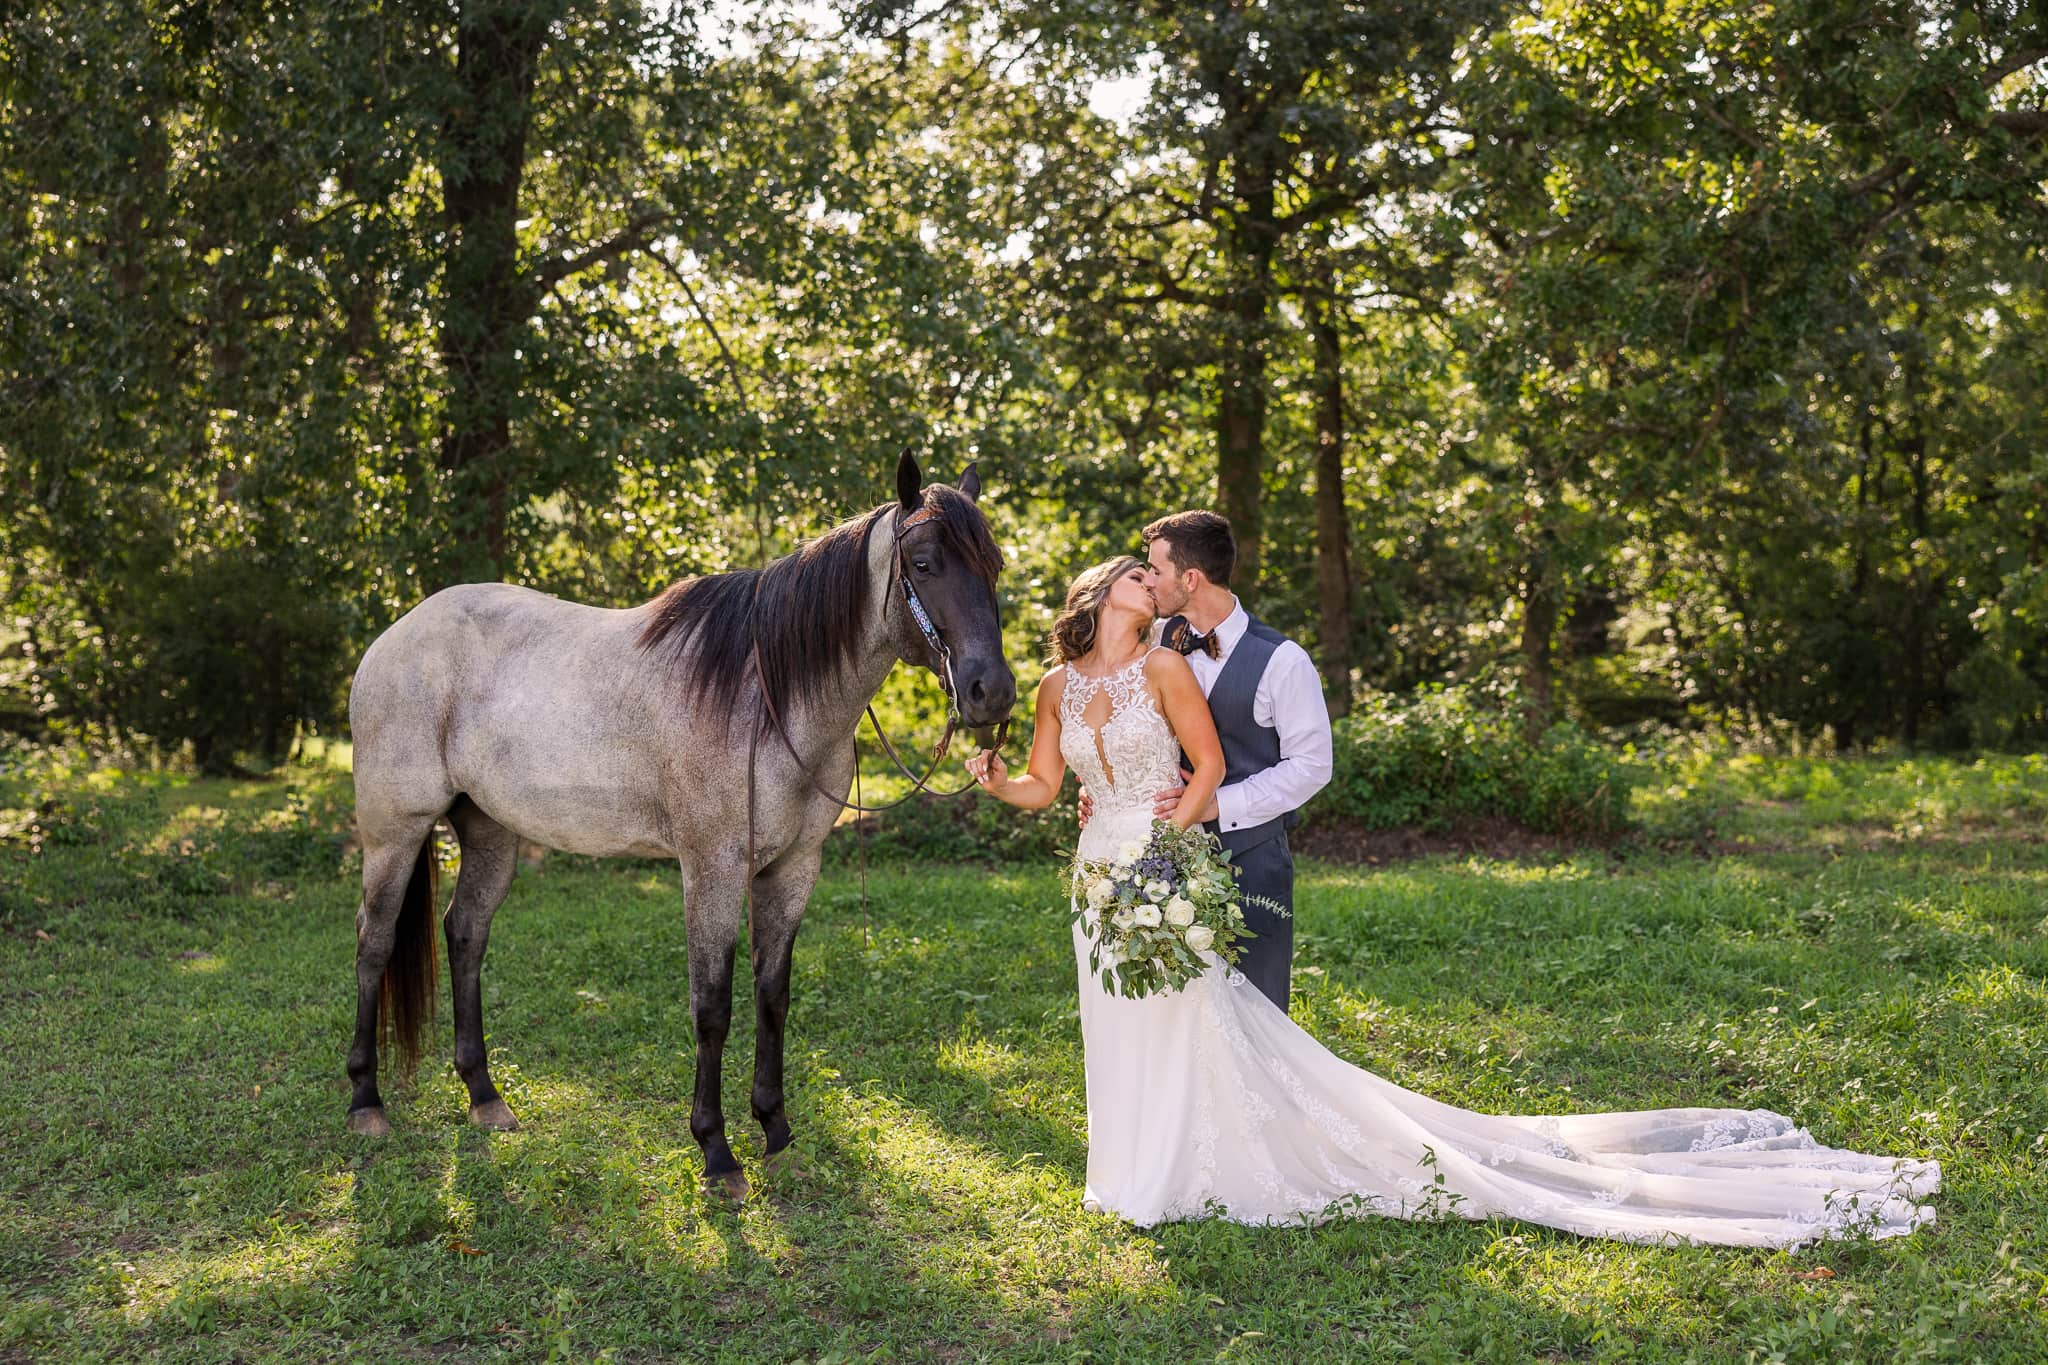 Outdoors in front of stand of trees, with the sun filtering through behind, stands a bride and groom, sharing a kiss with their beloved horse beside them.